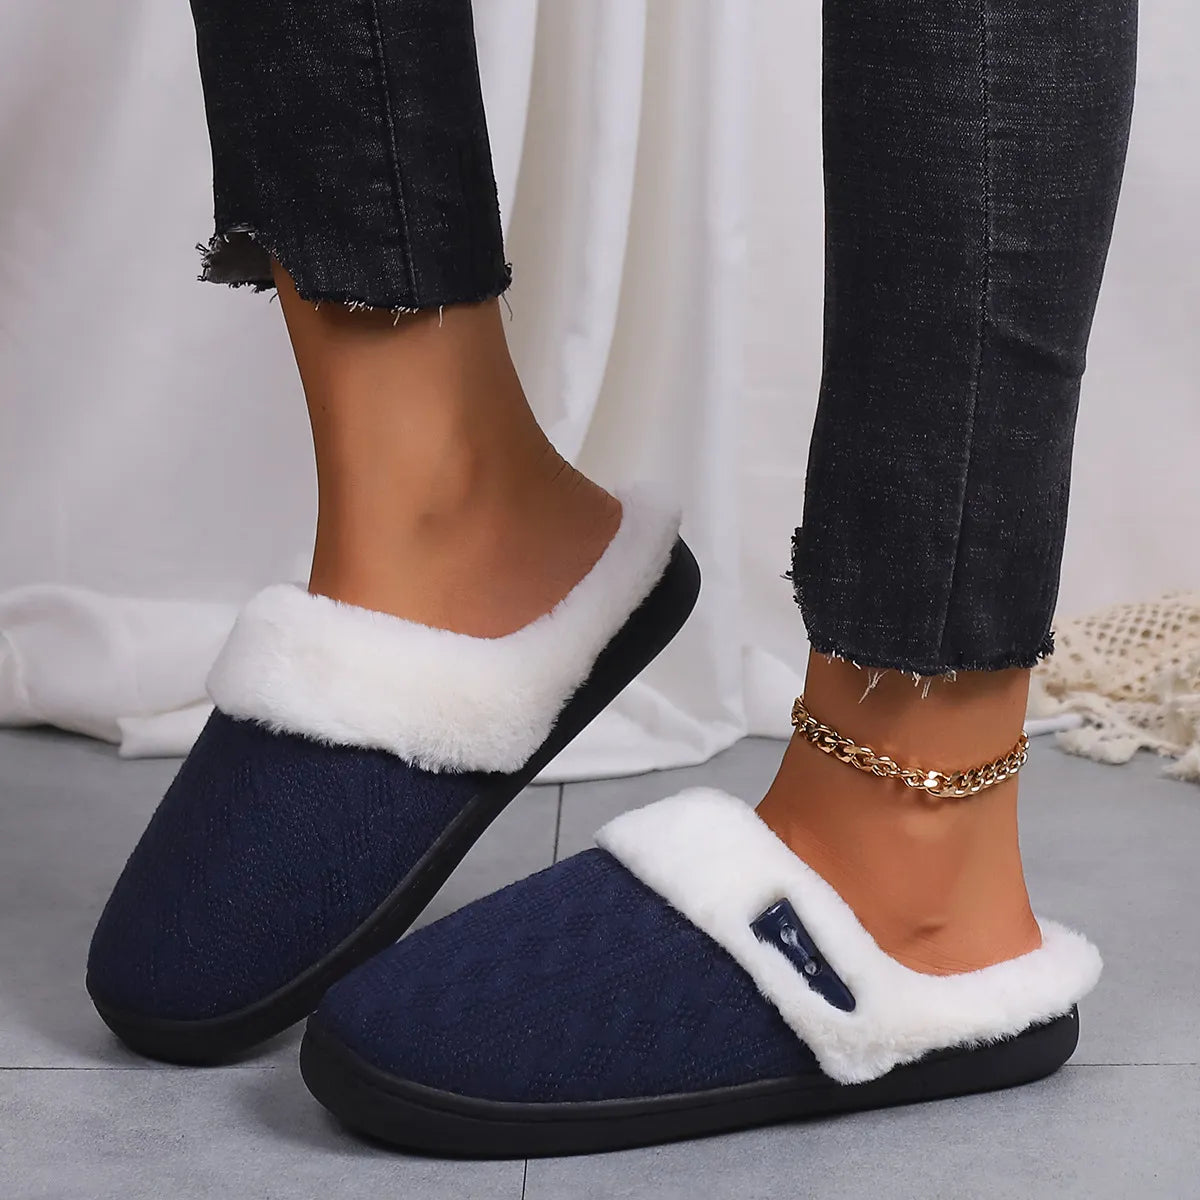 Women Winter Furry Slippers Short Plush Slippers Fashion Indoor Outdoor Fluffy Suede Slides Non-slip Home Cotton Shoes